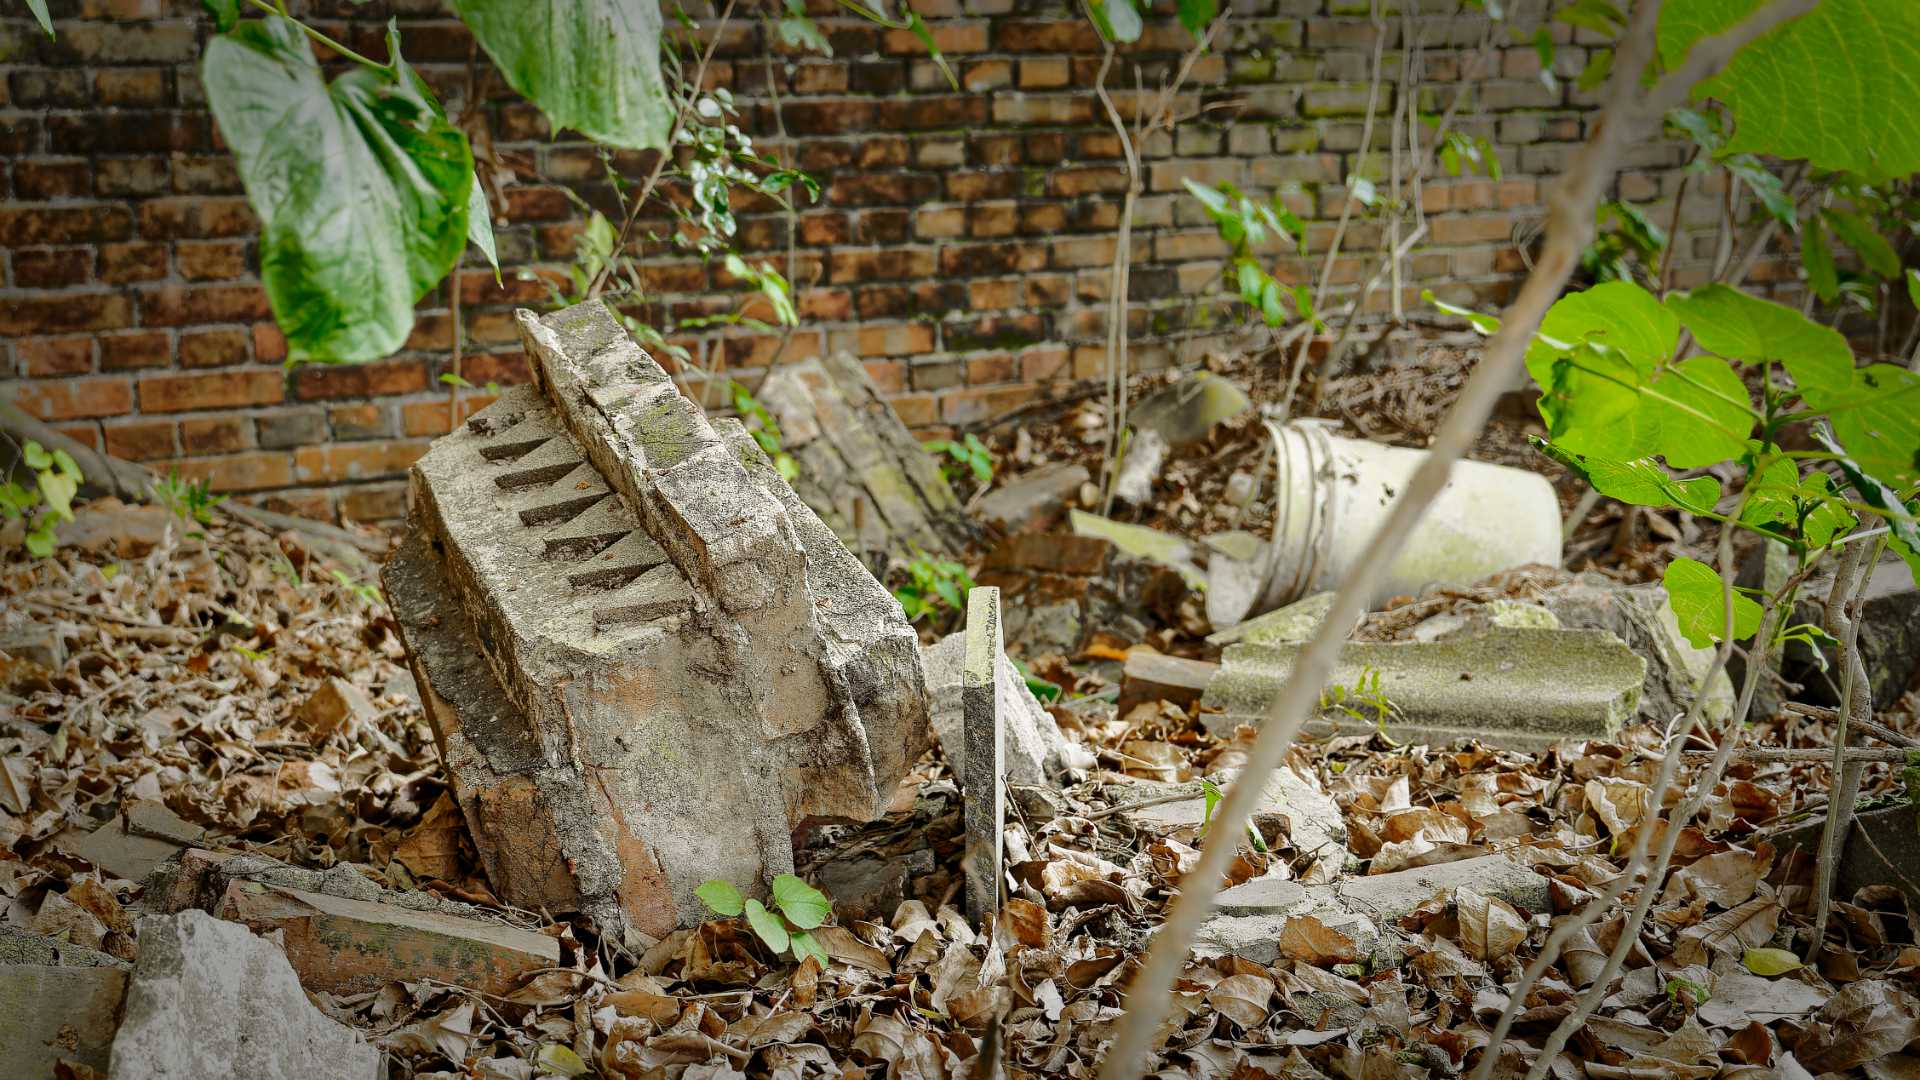 Fallen masonry on dry leaves, in the grounds of Minxiong Haunted House. A 20 liter plastic bucket lies on its side in the background.